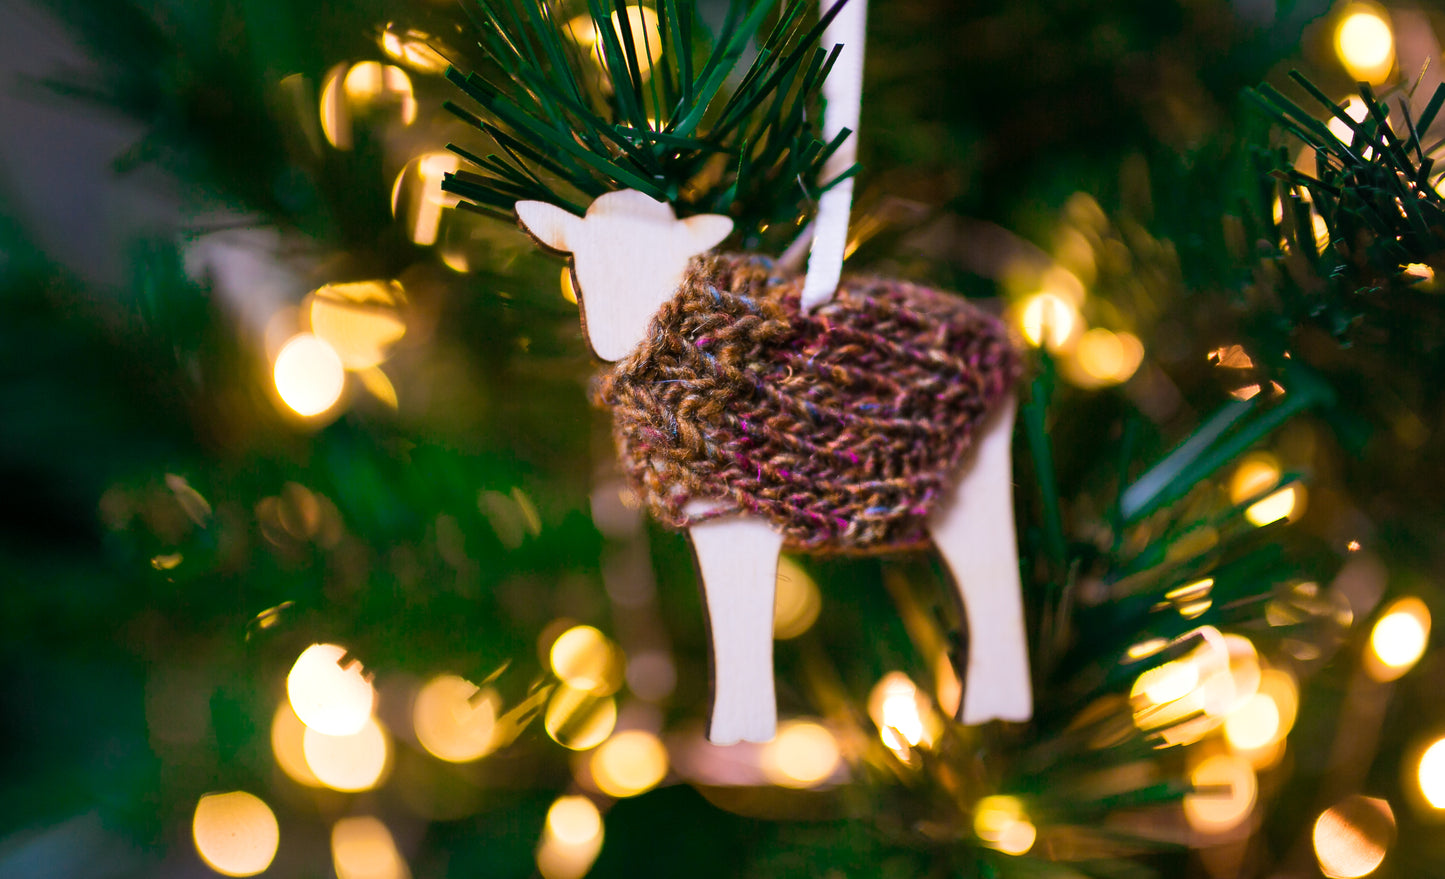 Holiday Decorations Ornaments Family of Sheep in Handknit Sweaters